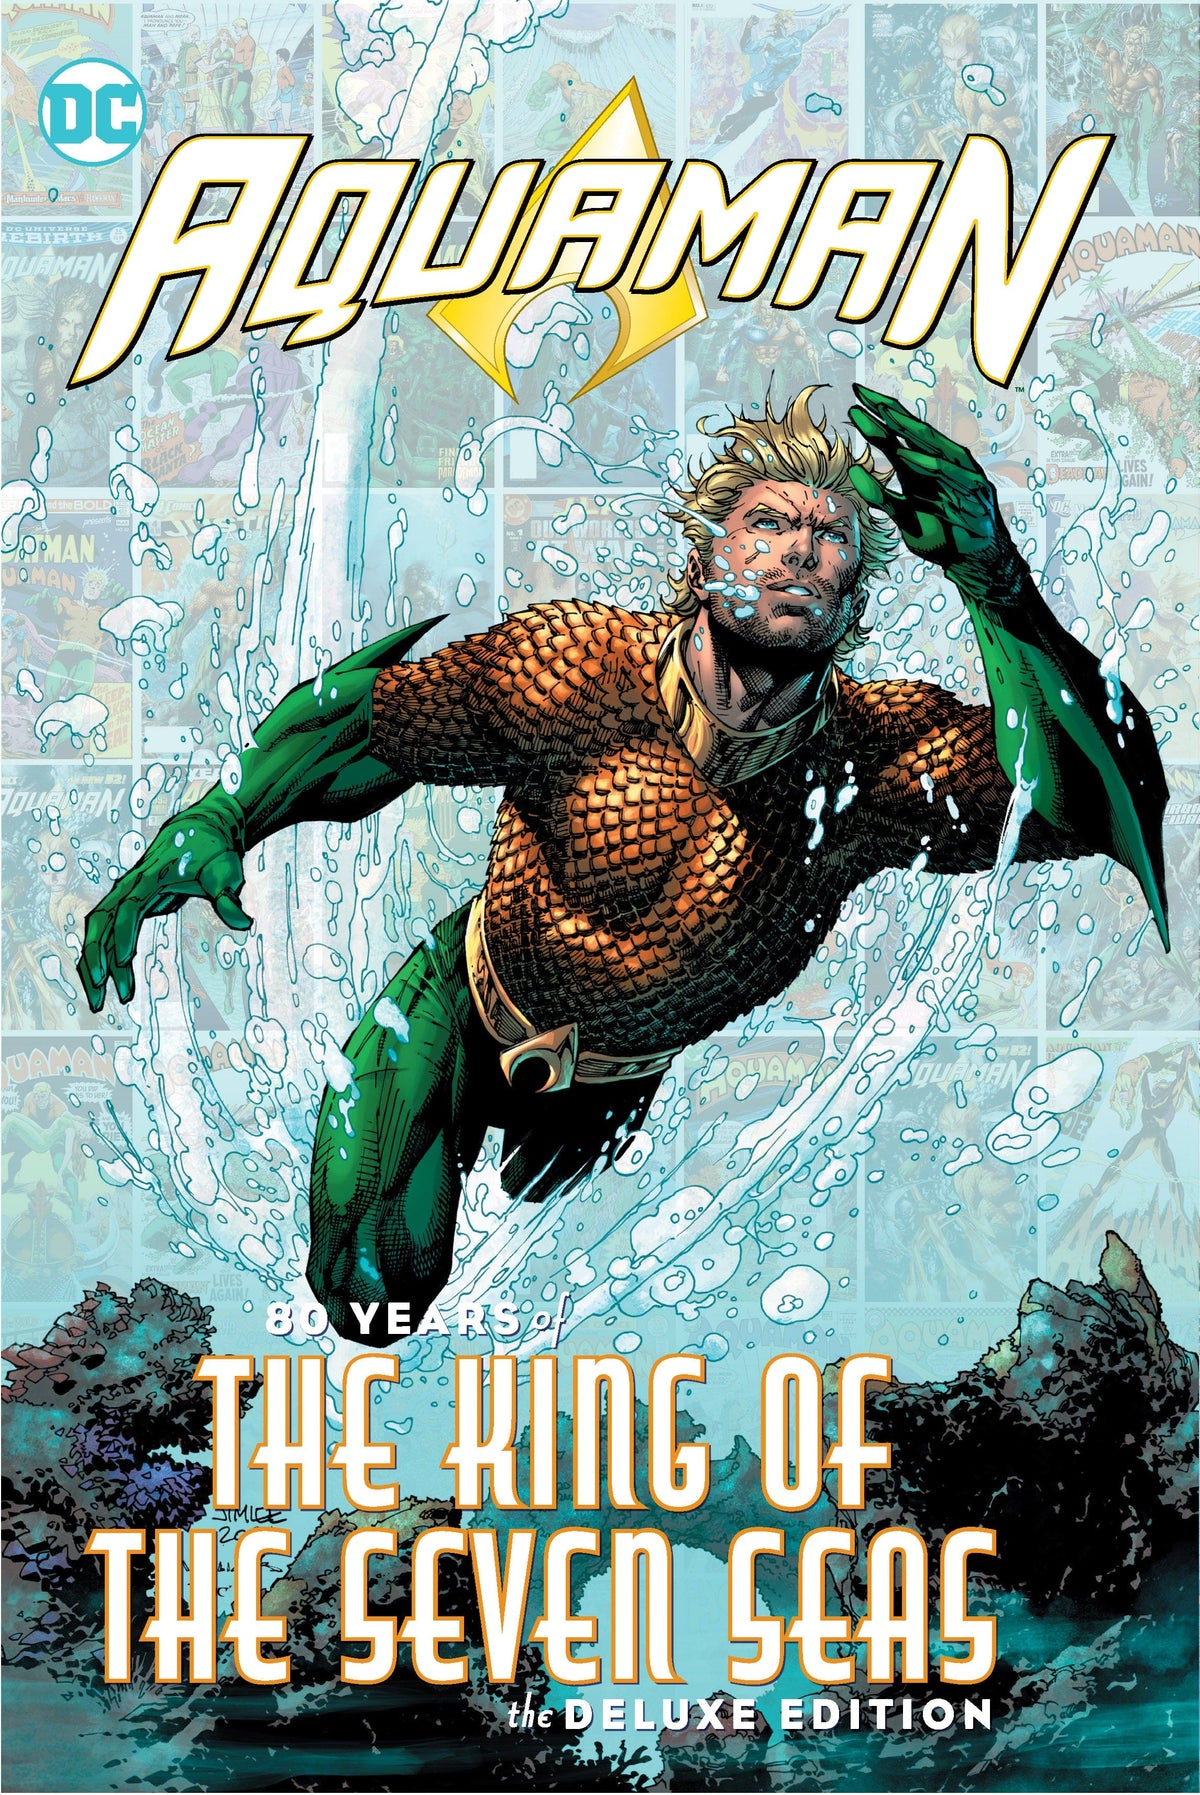 AQUAMAN 80 YEARS OF THE KING OF THE SEVEN SEAS THE DELUXE EDITION HC - Third Eye